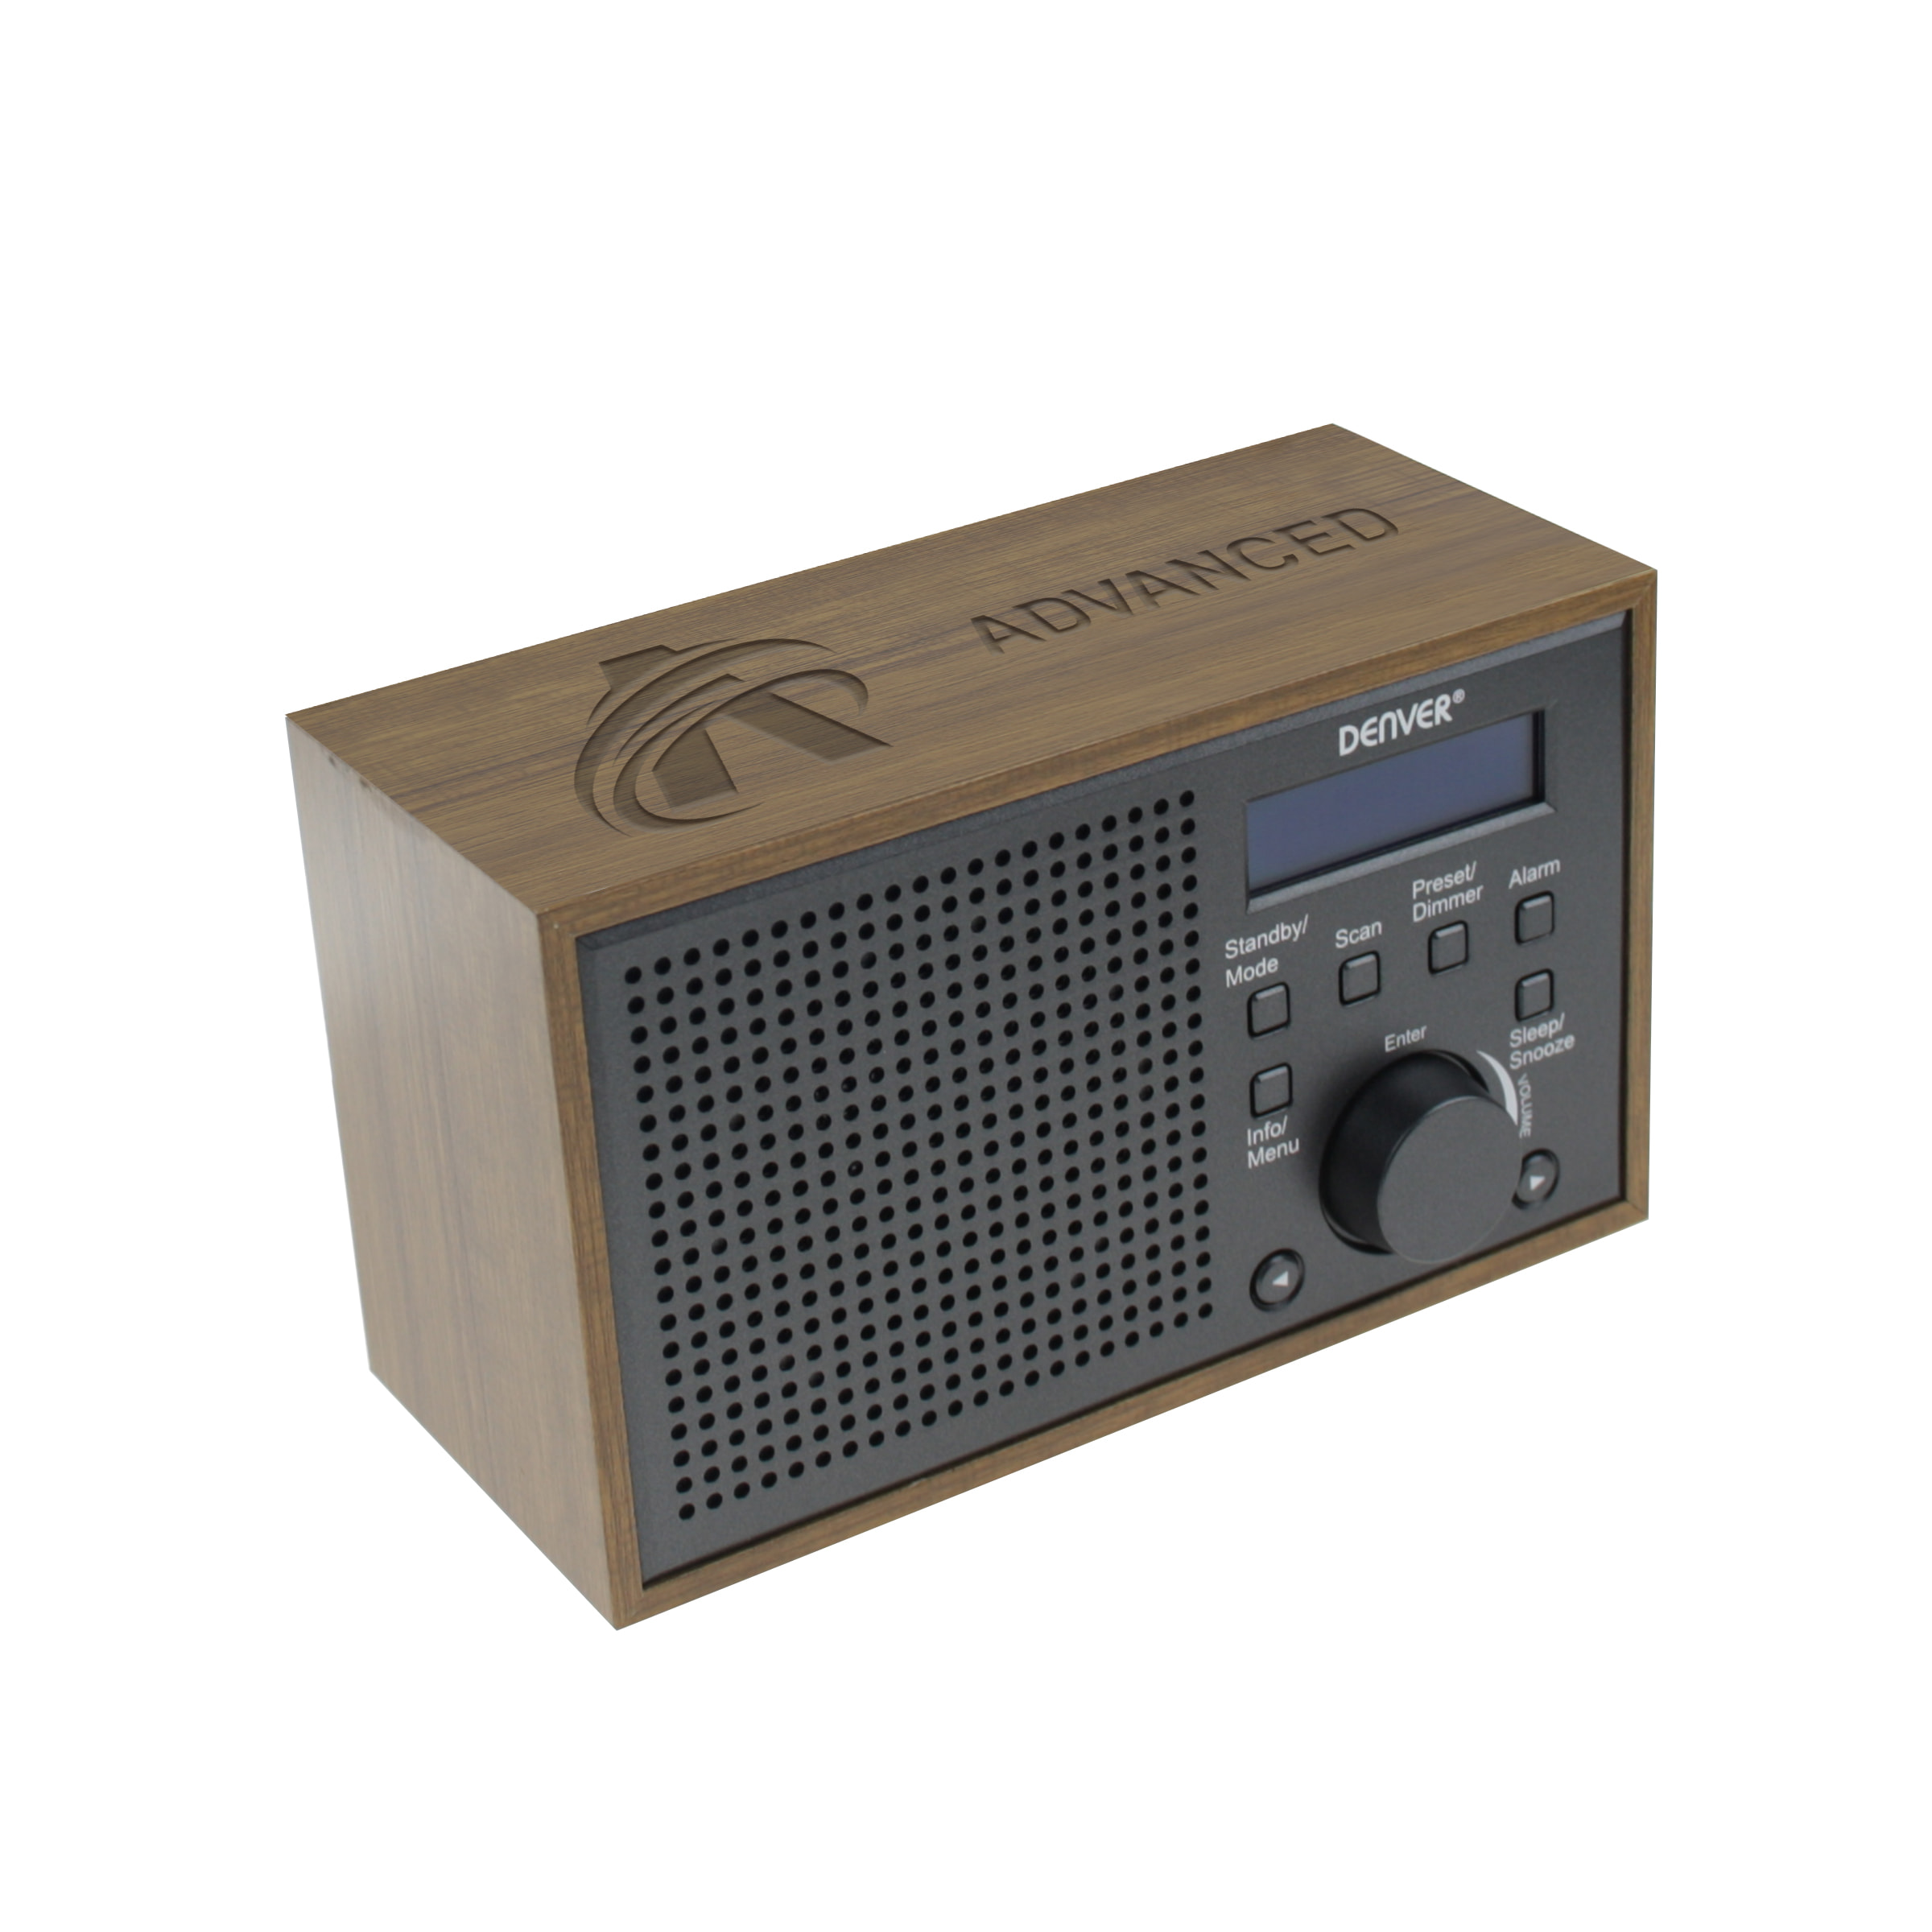 Denver Radio DAB-46 Brown - Personalisation with an engraving